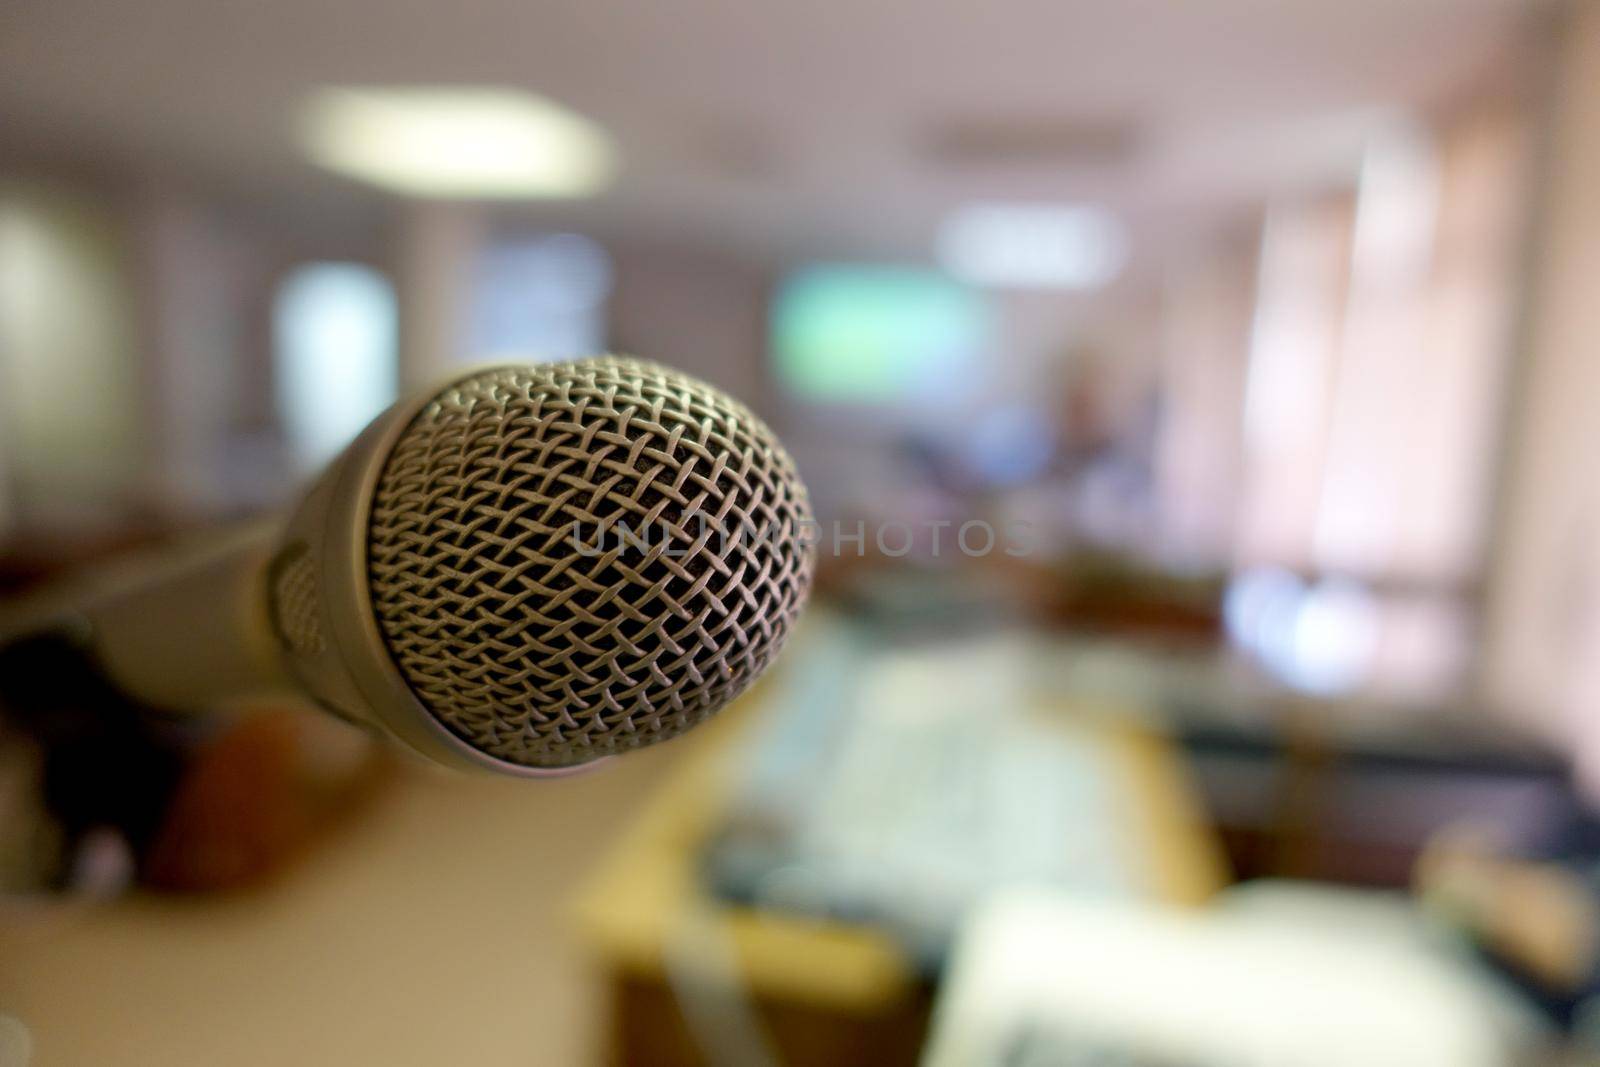 Vintage microphone over the Abstract blurred image of conference hall, study room or seminar room with attendee background, Small Business training concept, Public speaking by NarinNonthamand